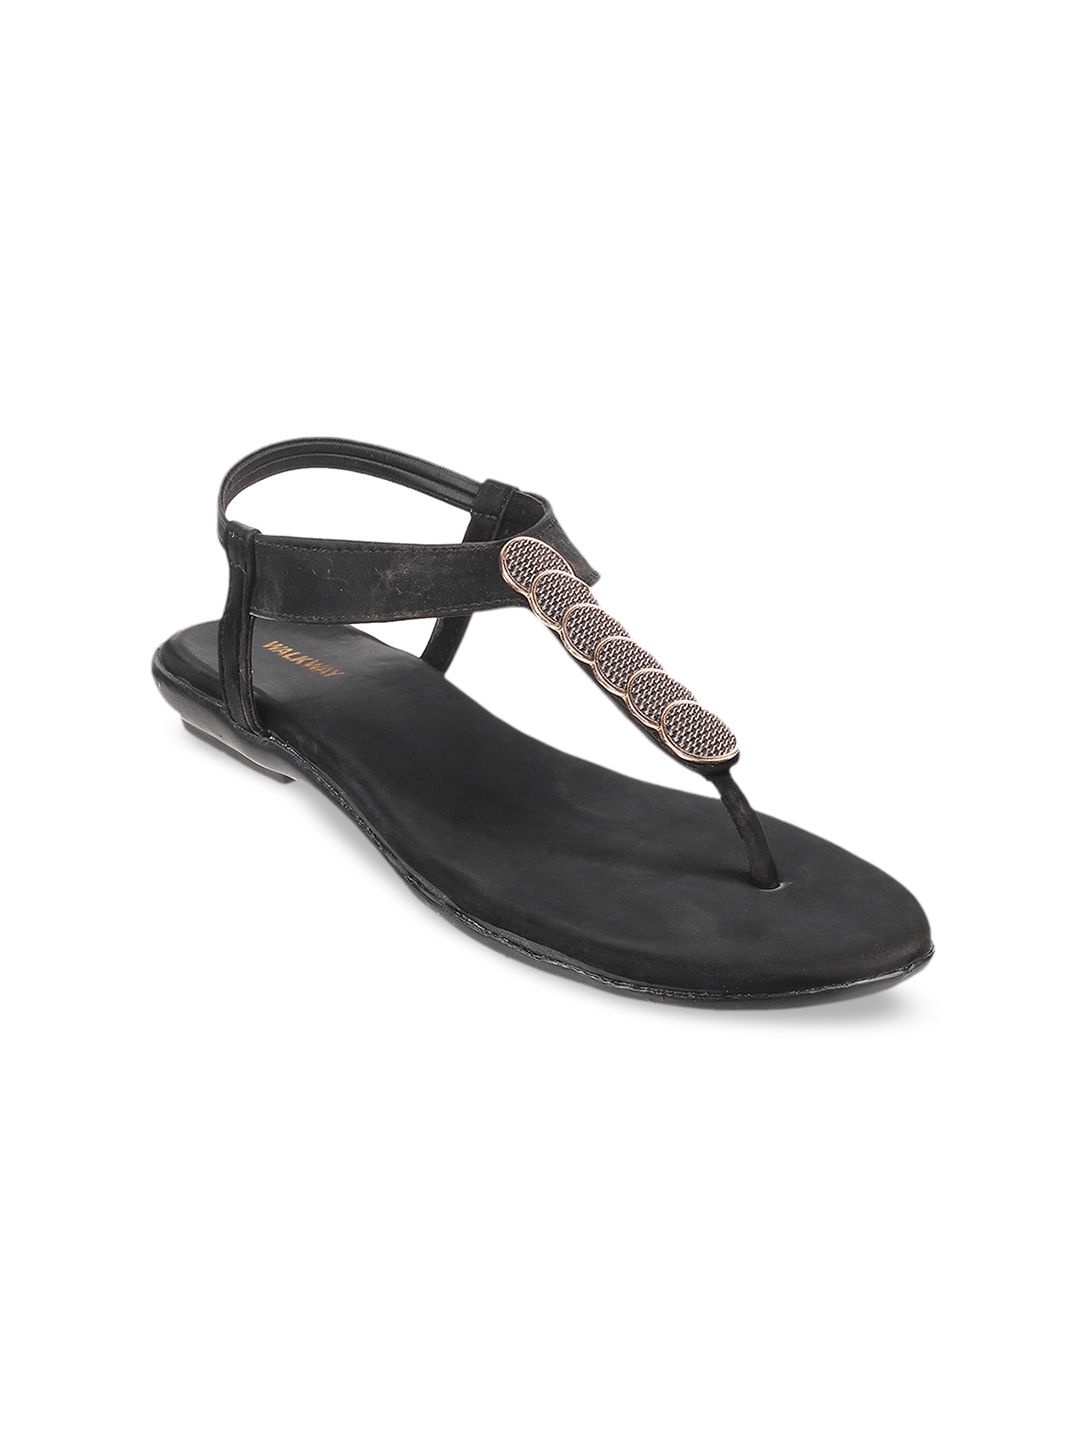 WALKWAY by Metro Women Black Embellished T-Strap Flats Price in India